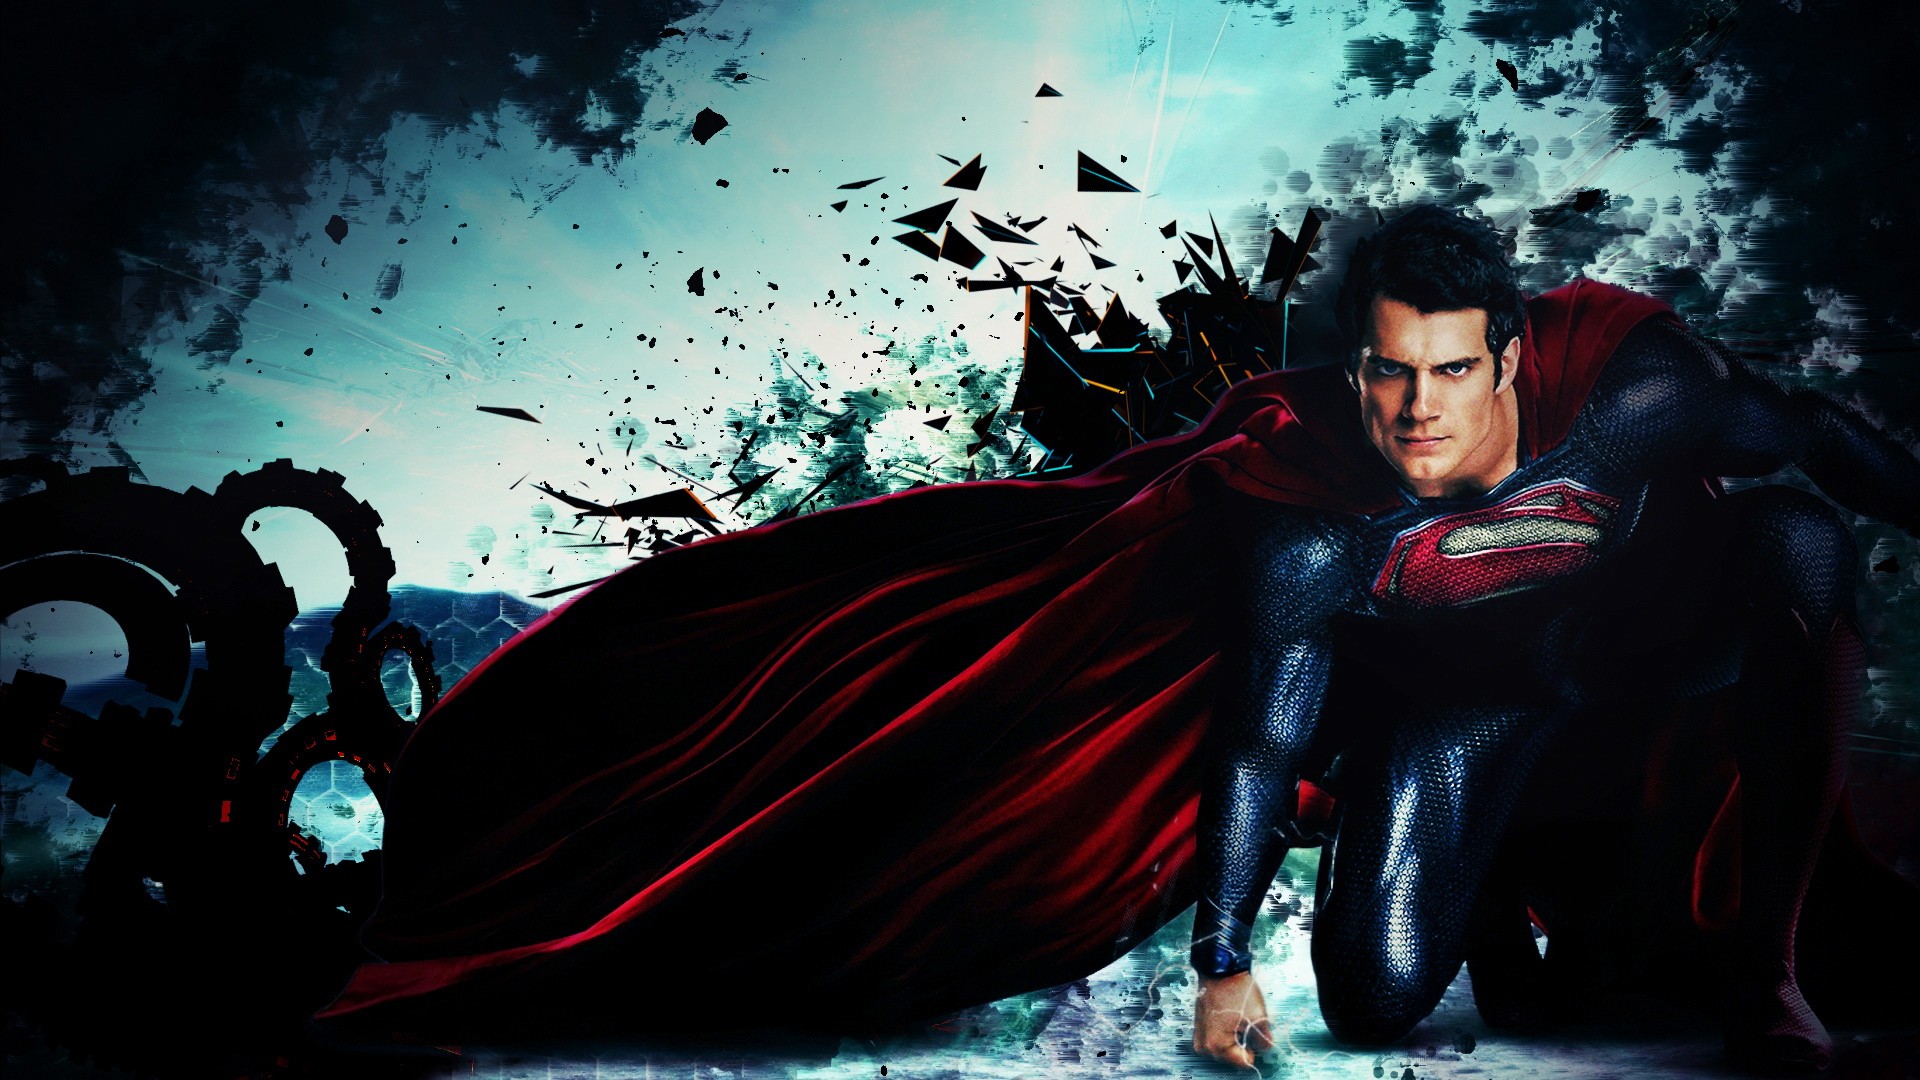 General 1920x1080 Superman Henry Cavill Man of Steel movies actor superhero cape looking at viewer